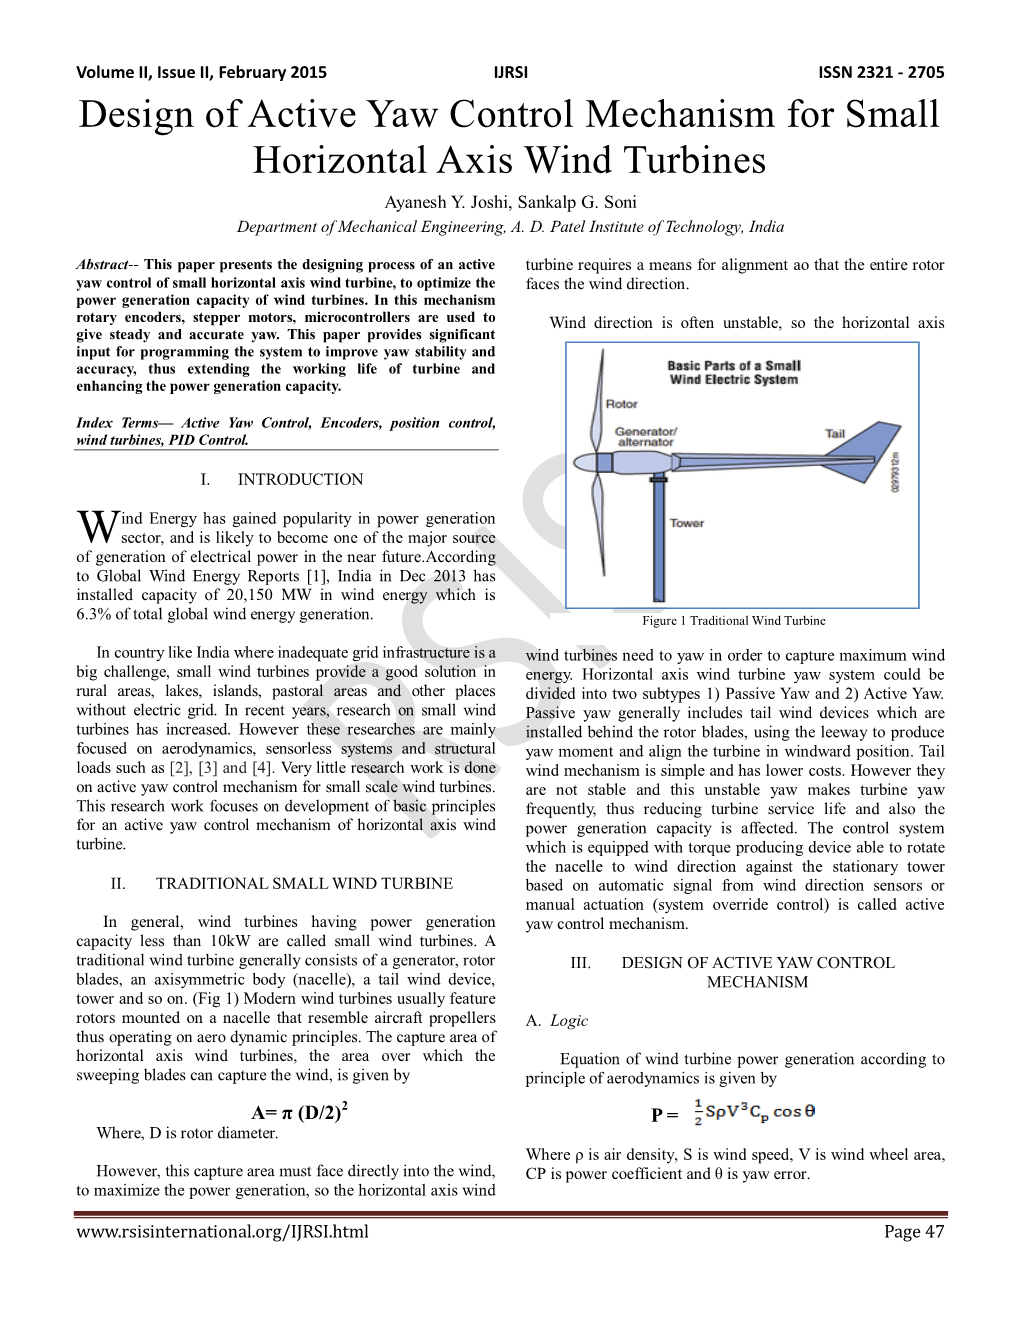 Design of Active Yaw Control Mechanism for Small Horizontal Axis Wind Turbines Ayanesh Y